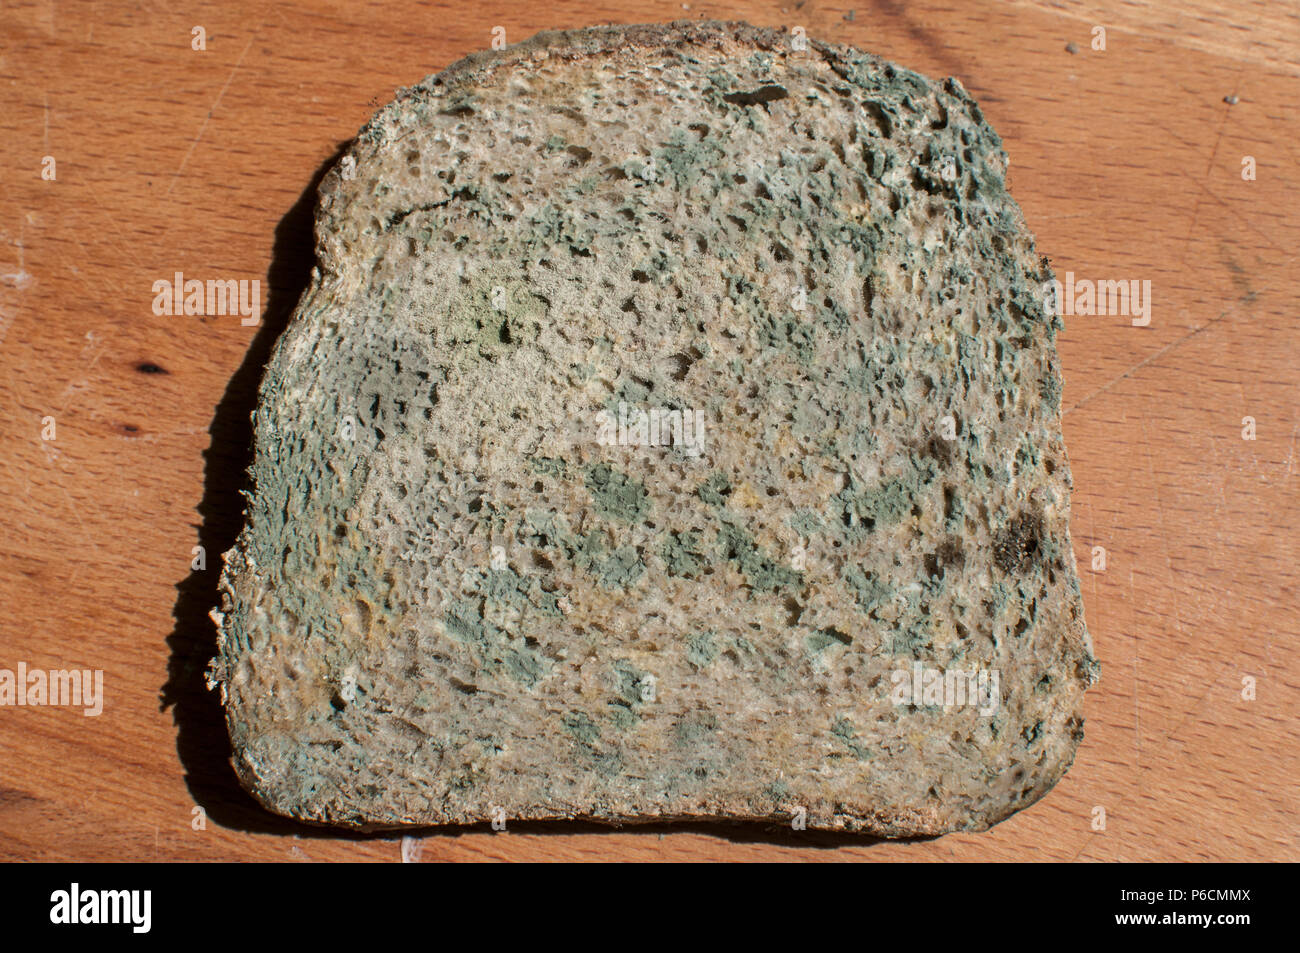 Moldy slices of whole-grain bread closeup on wooden board background Stock Photo